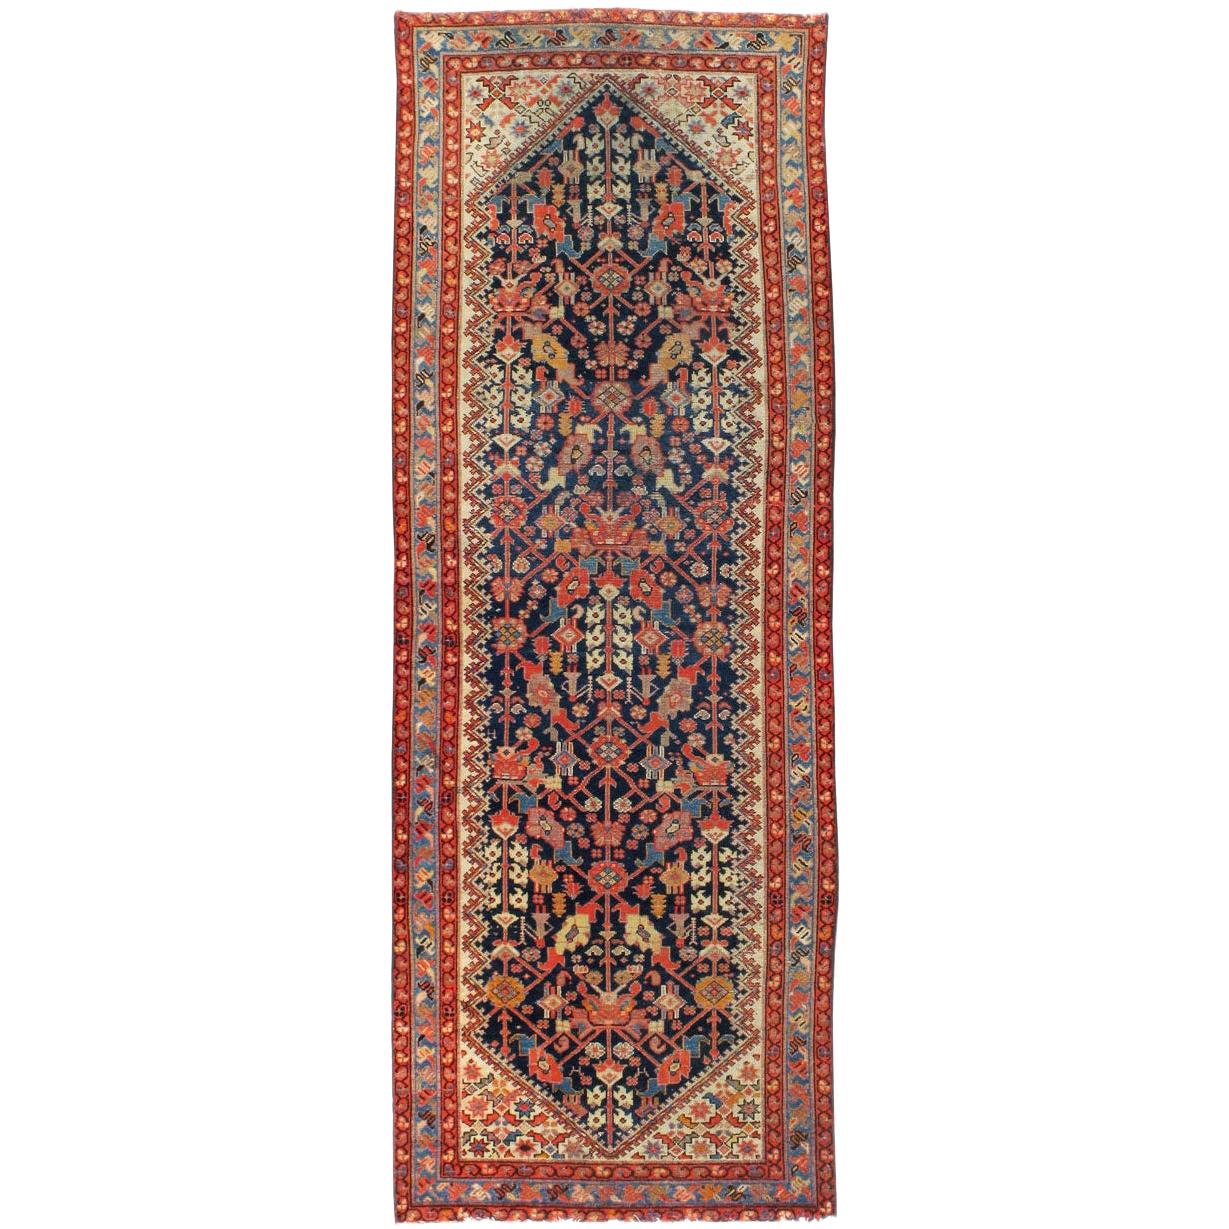 Rustic Handmade Persian Runner in Navy, Red, Ivory, and Light Blue